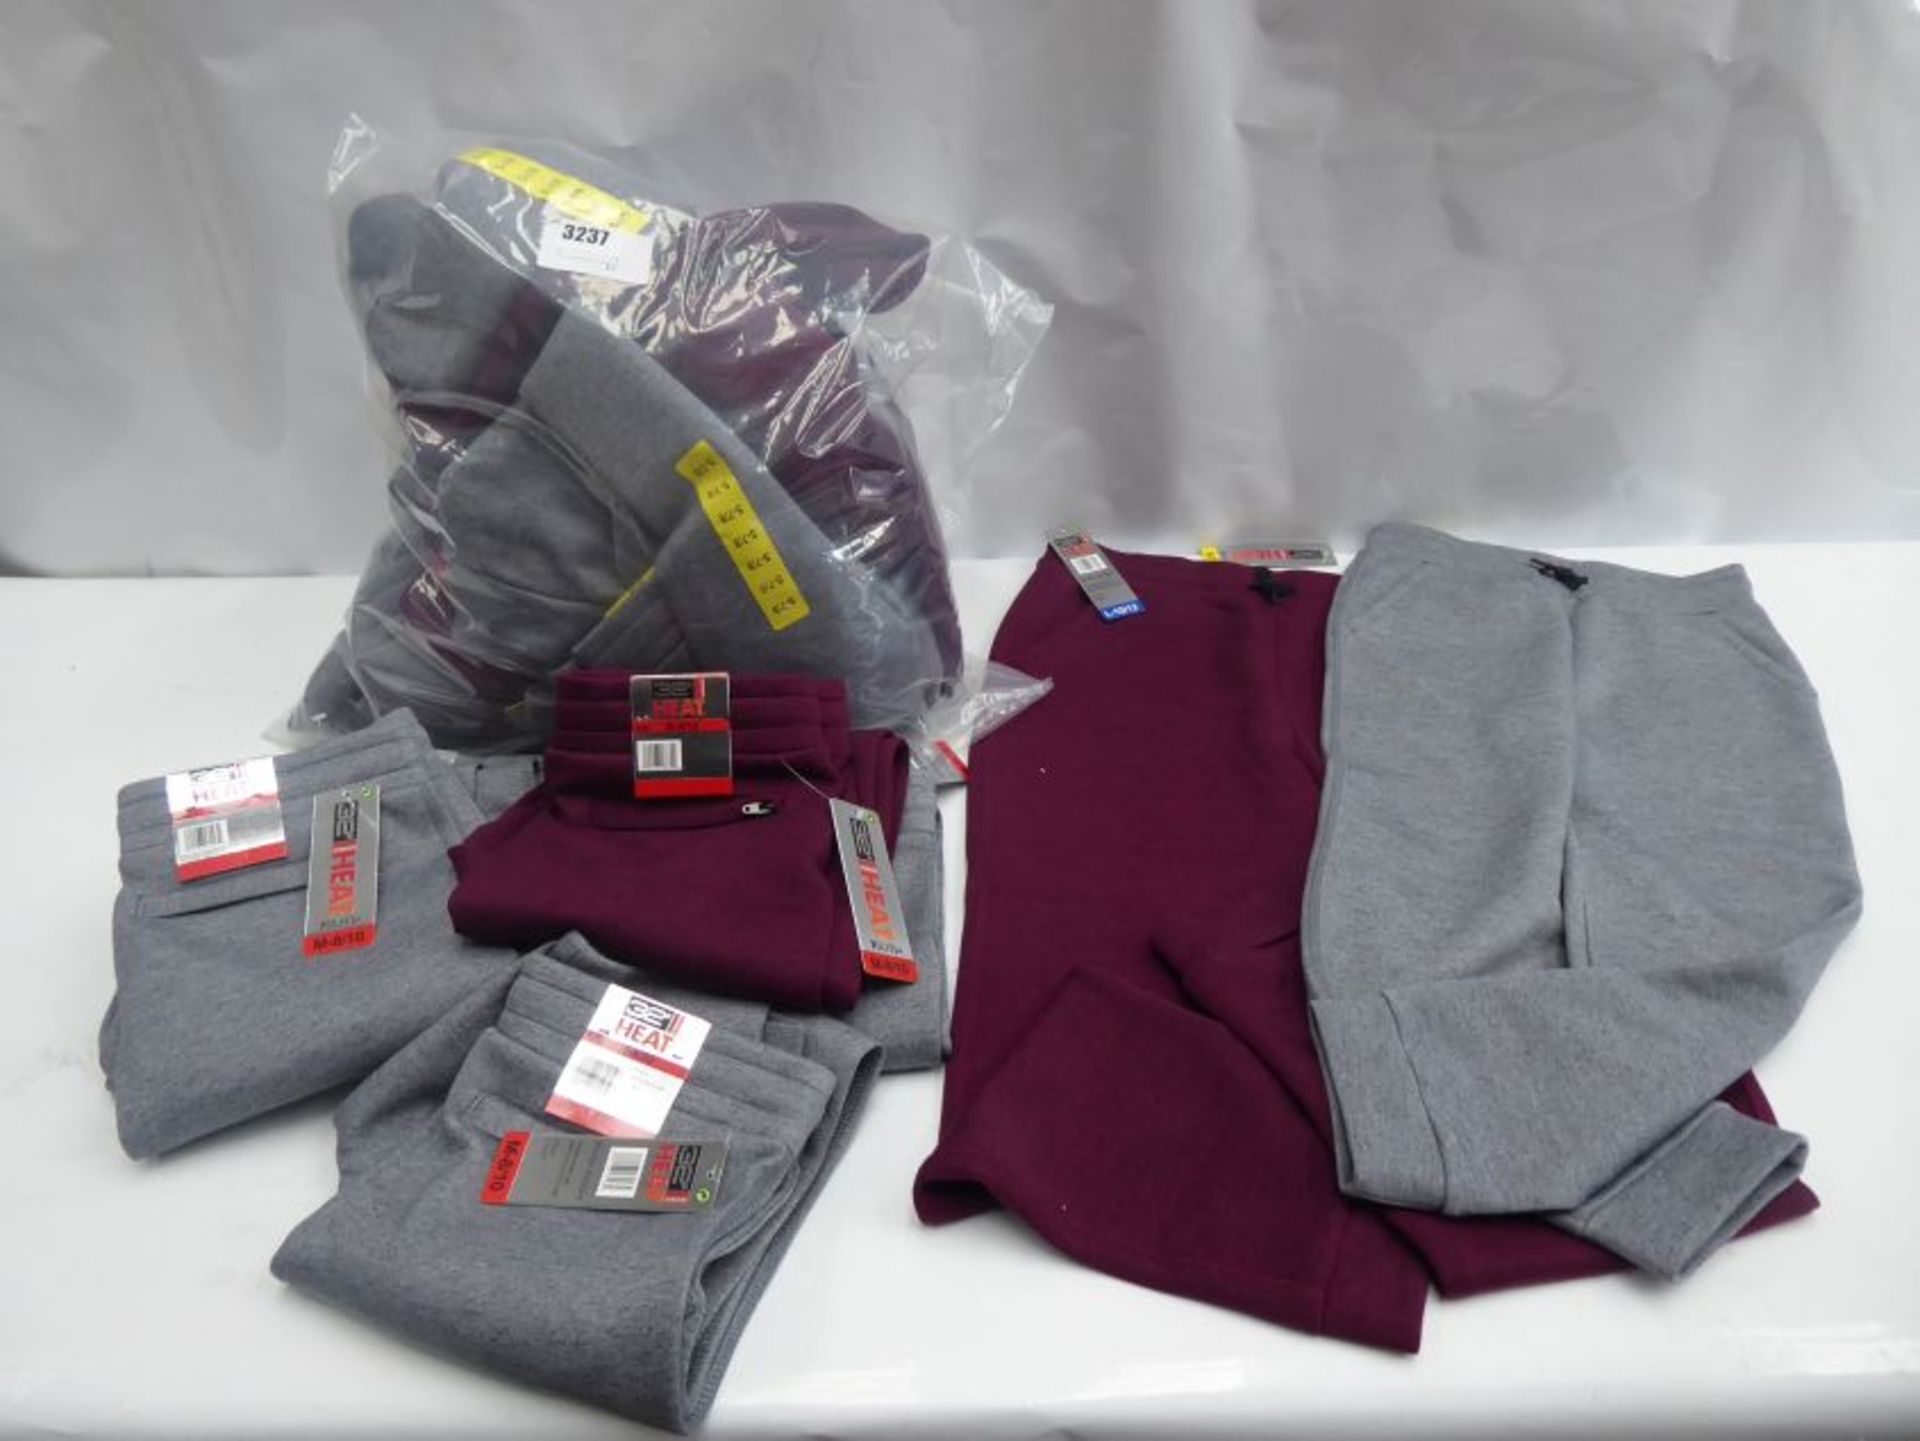 Bag containing 20 pairs of youth jogging pants by 32 Degree Heat in light grey and maroon, sizes